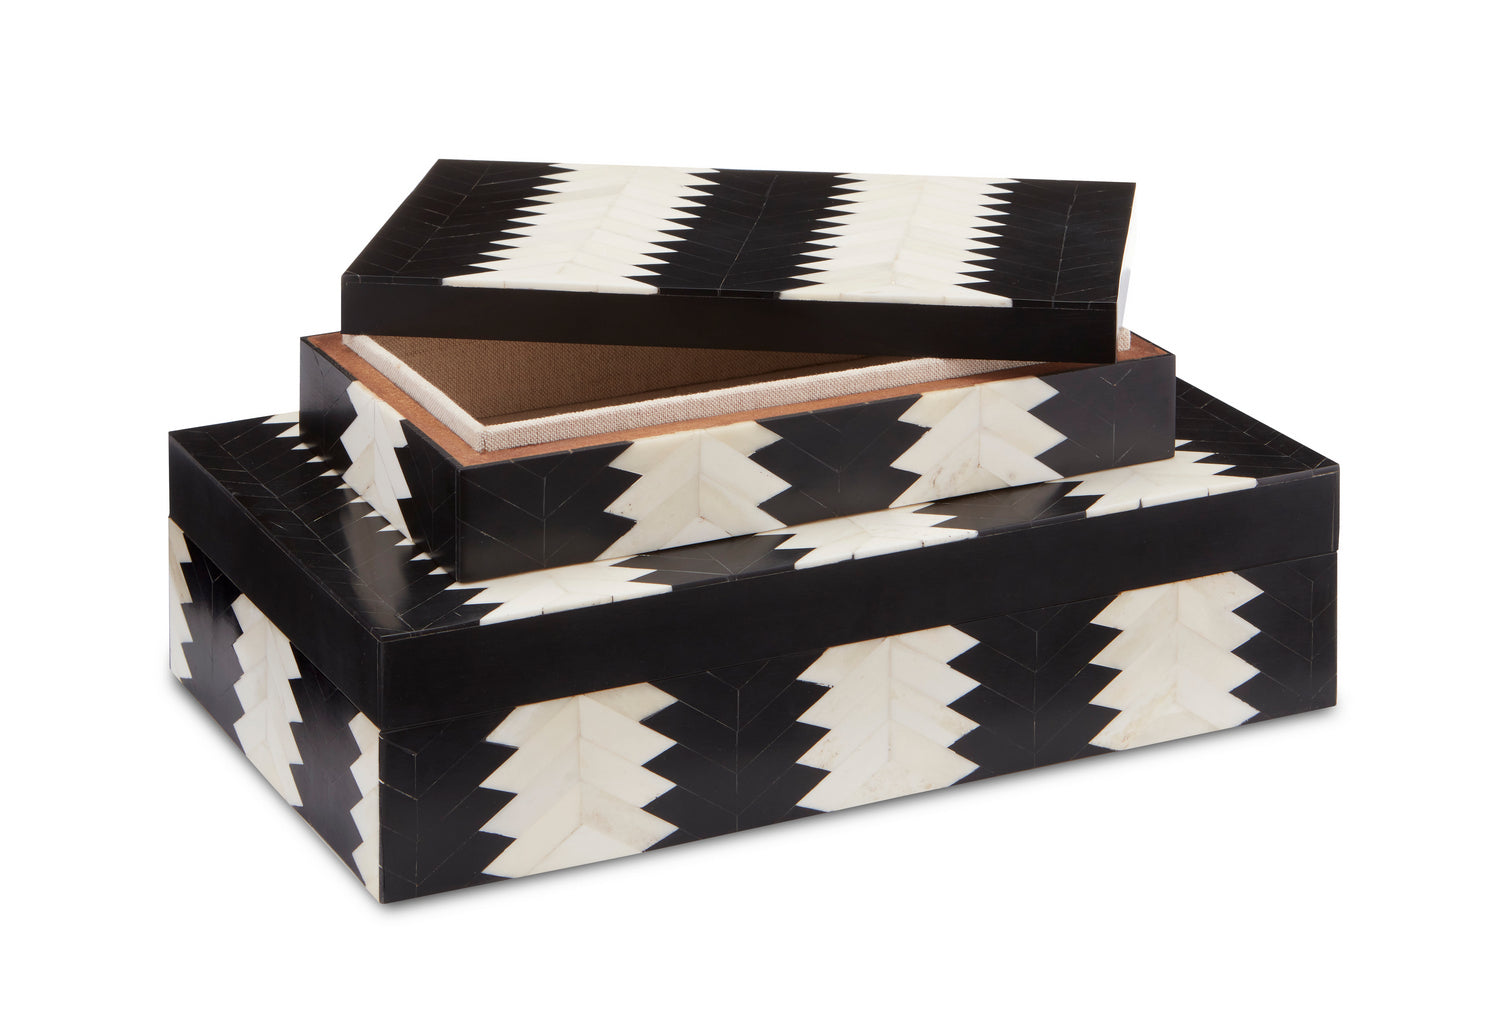 Box Set of 2 from the Jamie Beckwith collection in Black/White/Natural finish